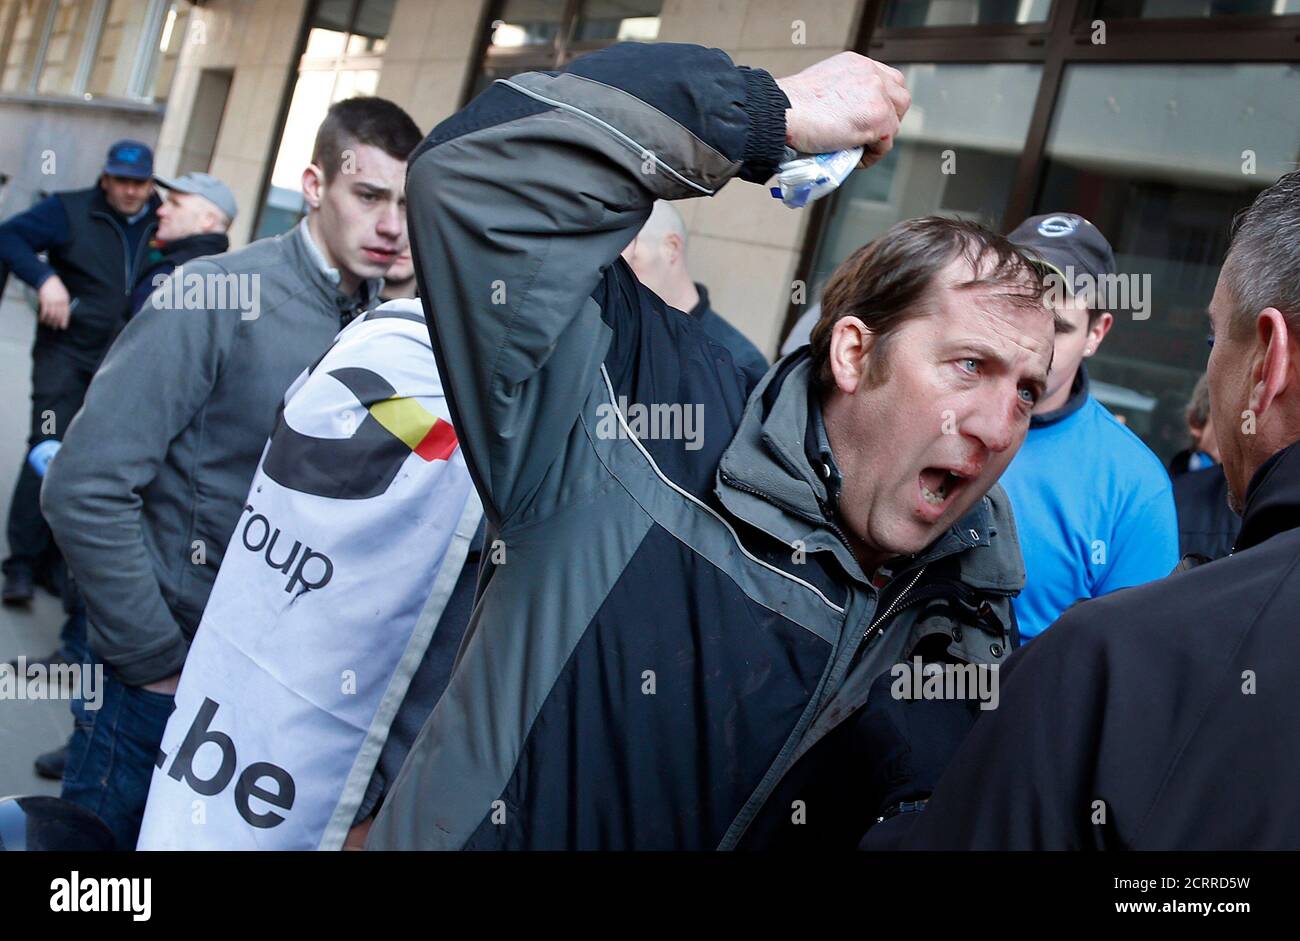 A farmers argues with a plainclothes policeman during a demonstration outside the EU headquarters in Brussels, Belgium, March 14, 2016.     REUTERS/Francois Lenoir Stock Photo